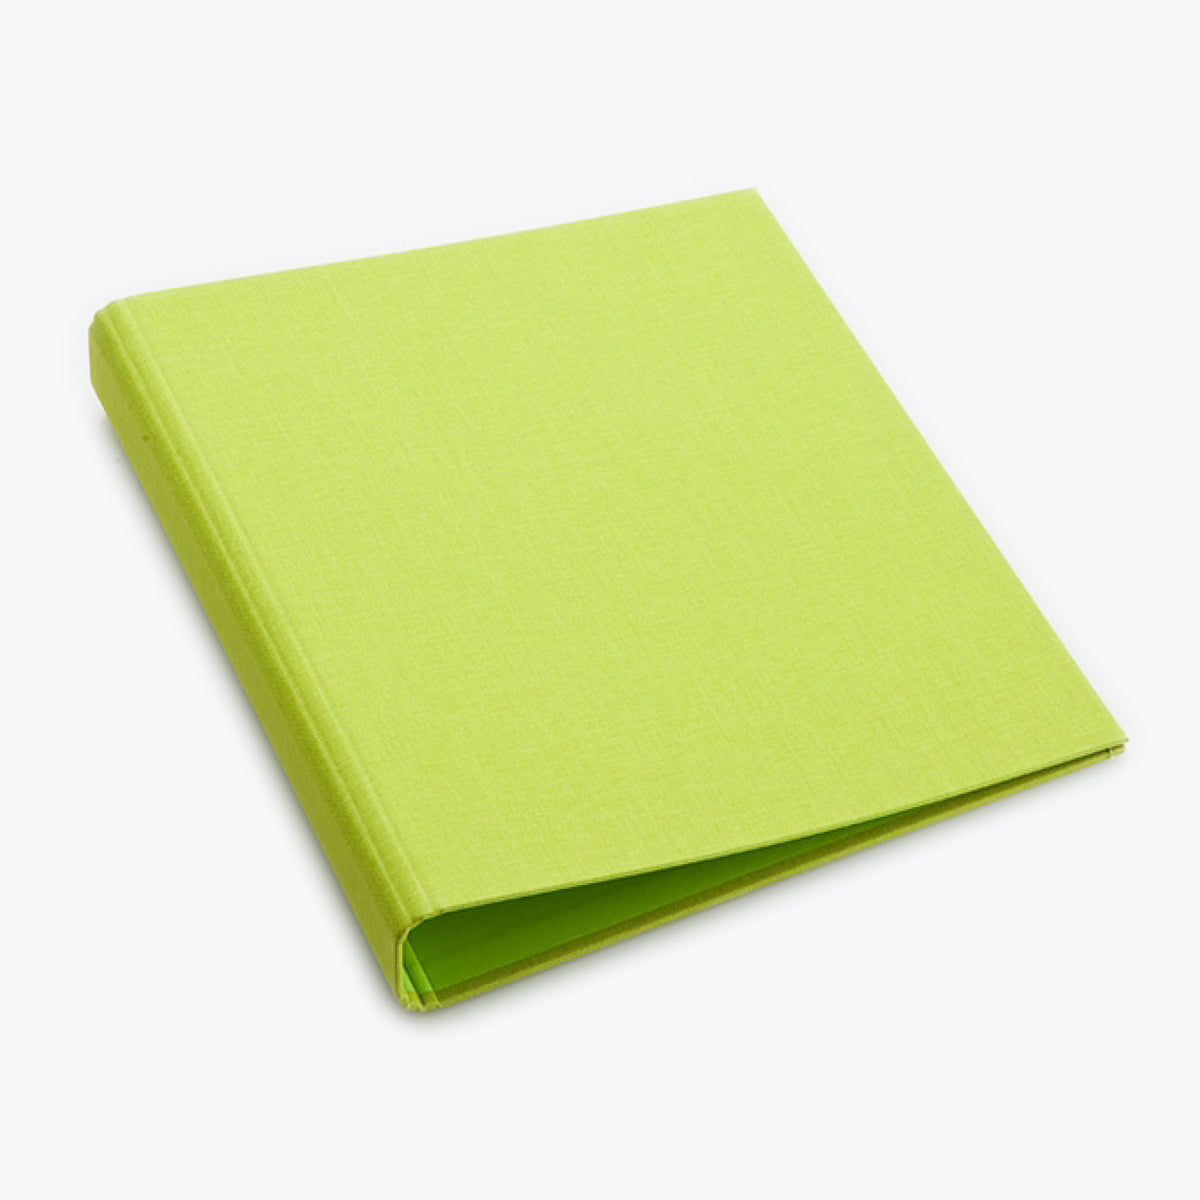 Bookbinders Design - Cloth Ringbinder - A3 - Apple <Outgoing>